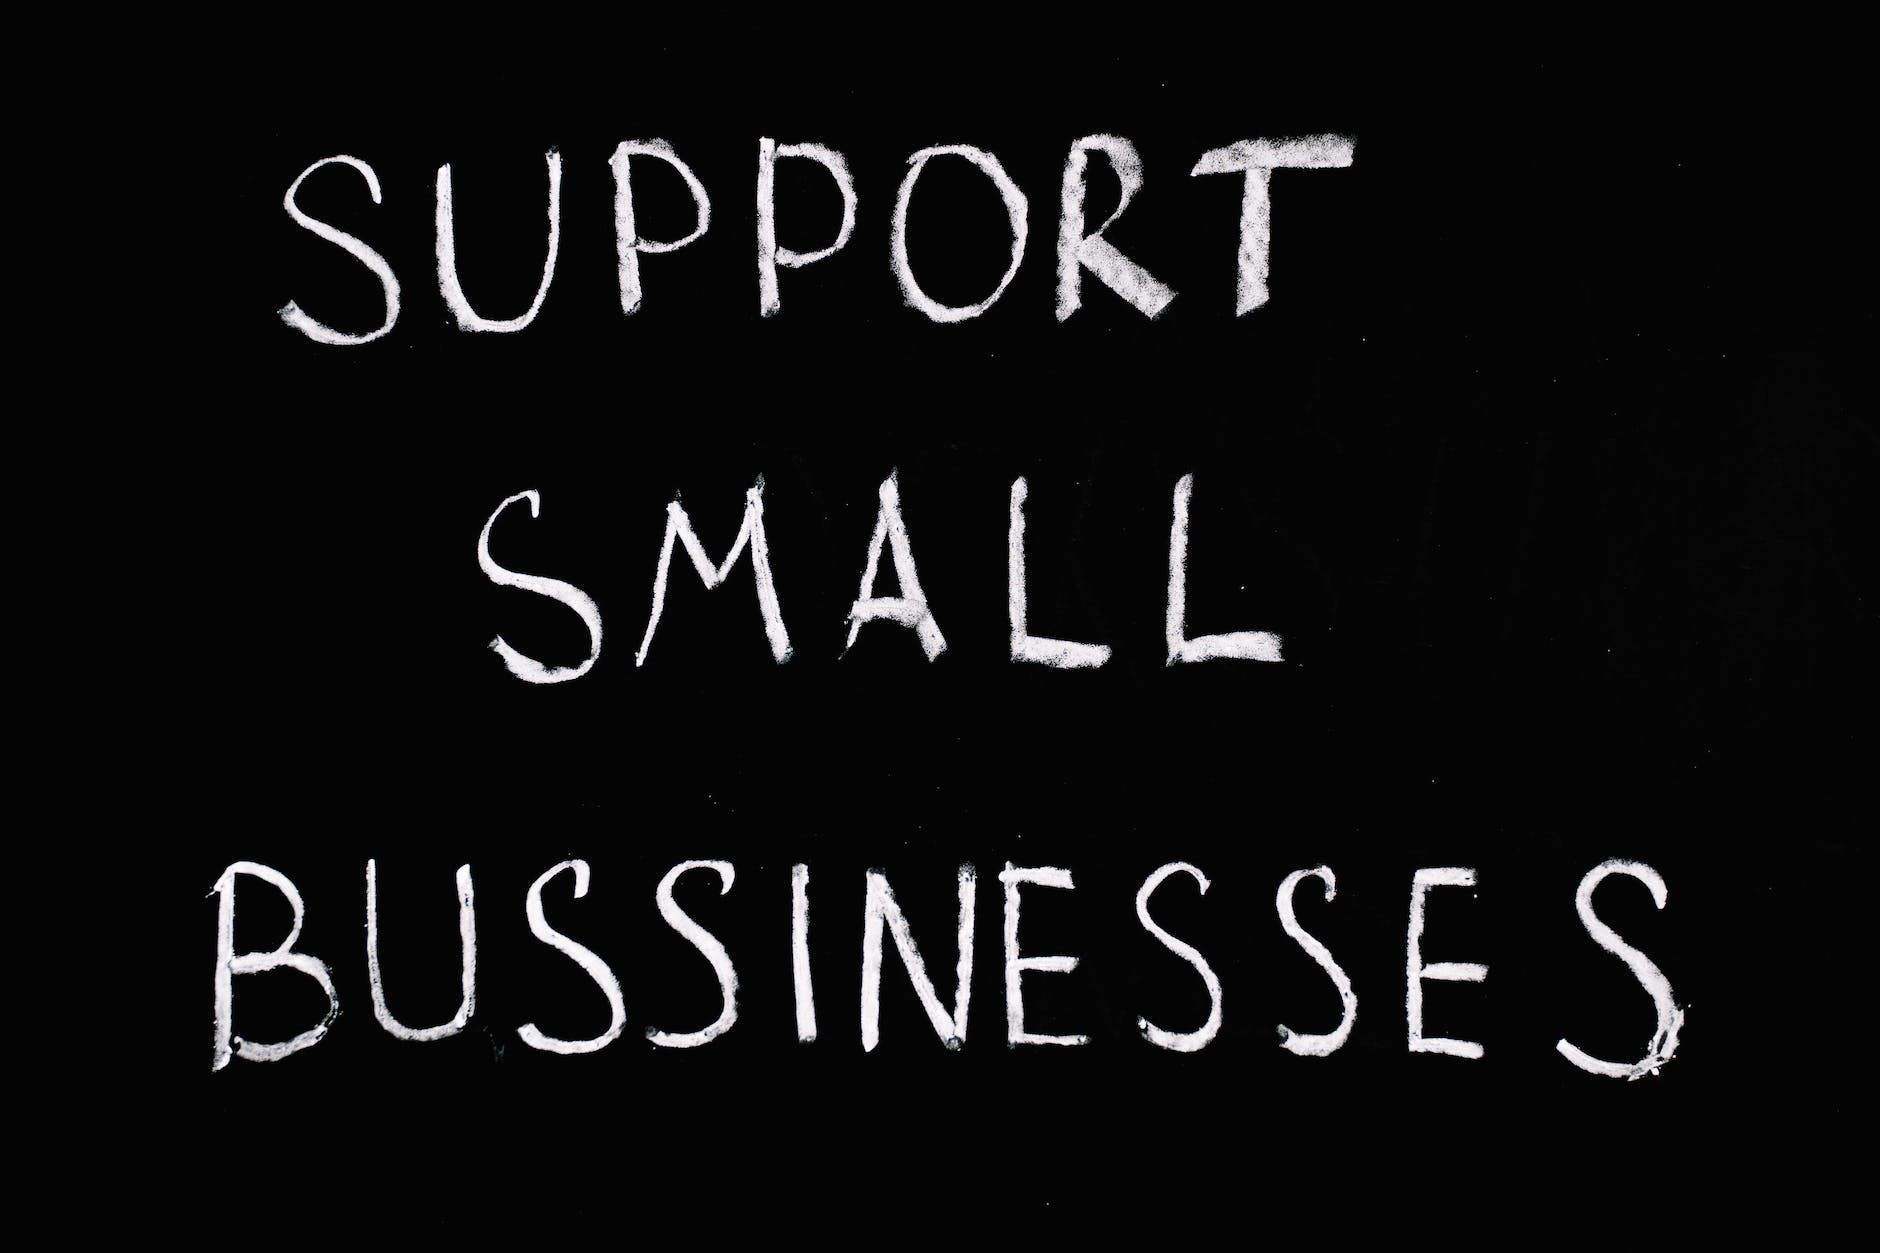 support small businesses lettering text on black background